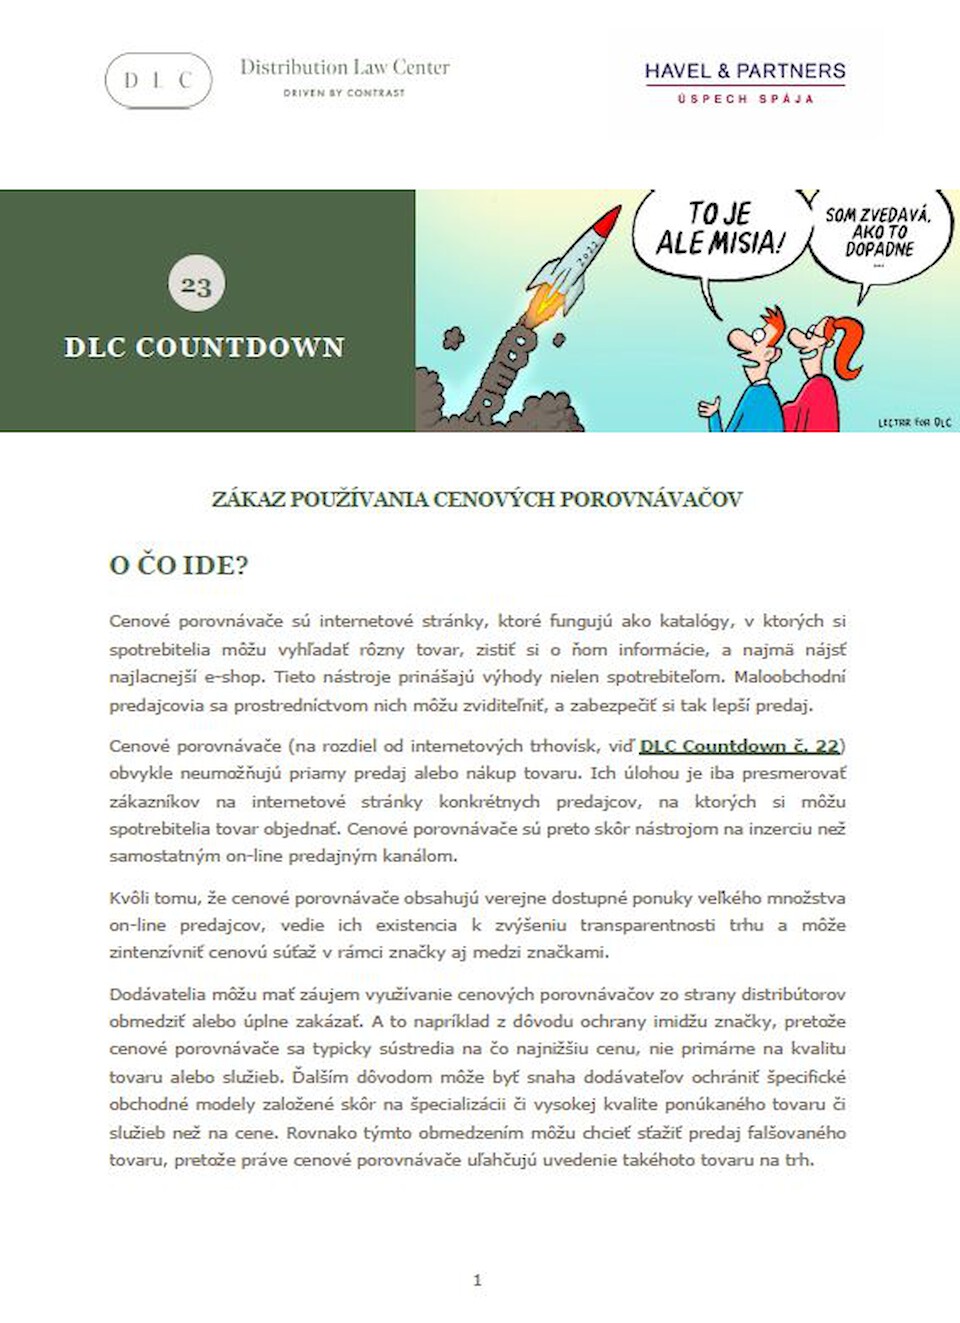 Distribution Law Center Countdown XXIII - Bans on the use of price comparison services